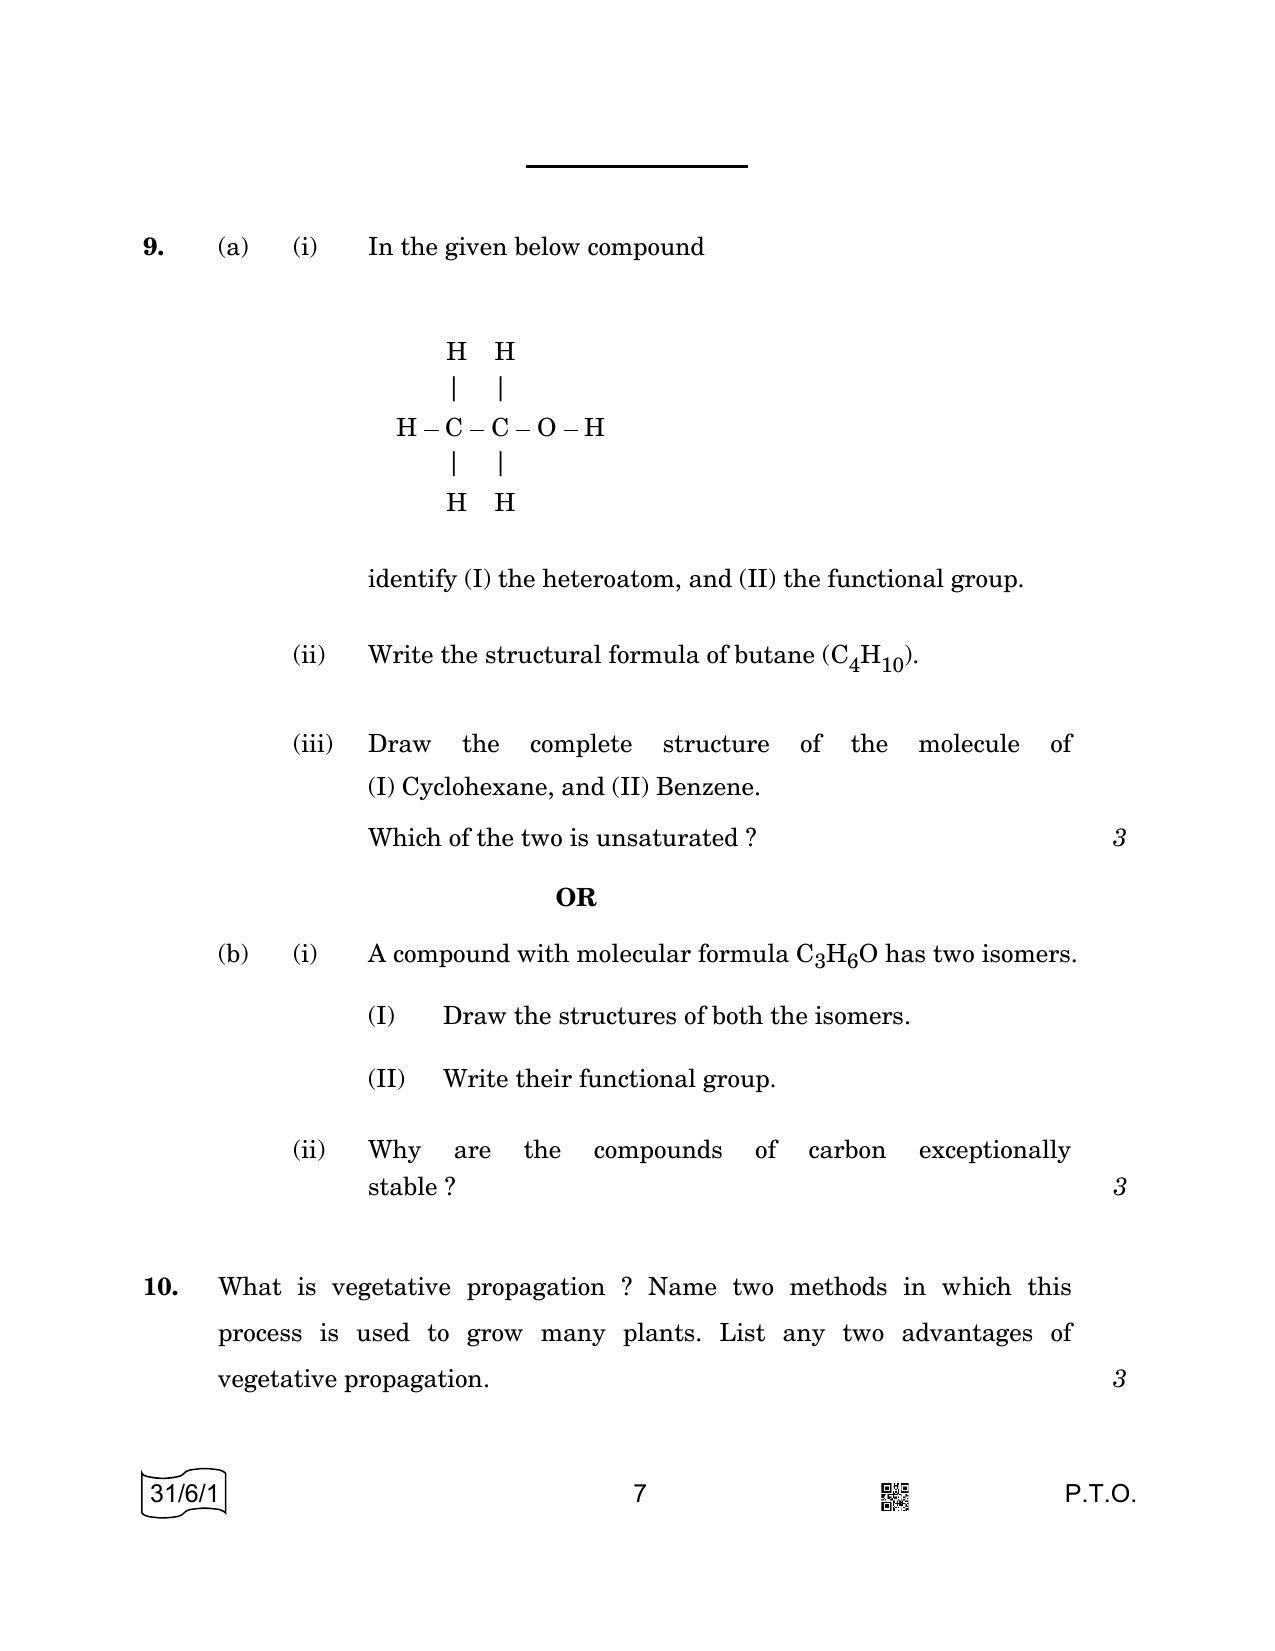 CBSE Class 10 31-6-1 SCIENCE 2022 Compartment Question Paper - Page 7